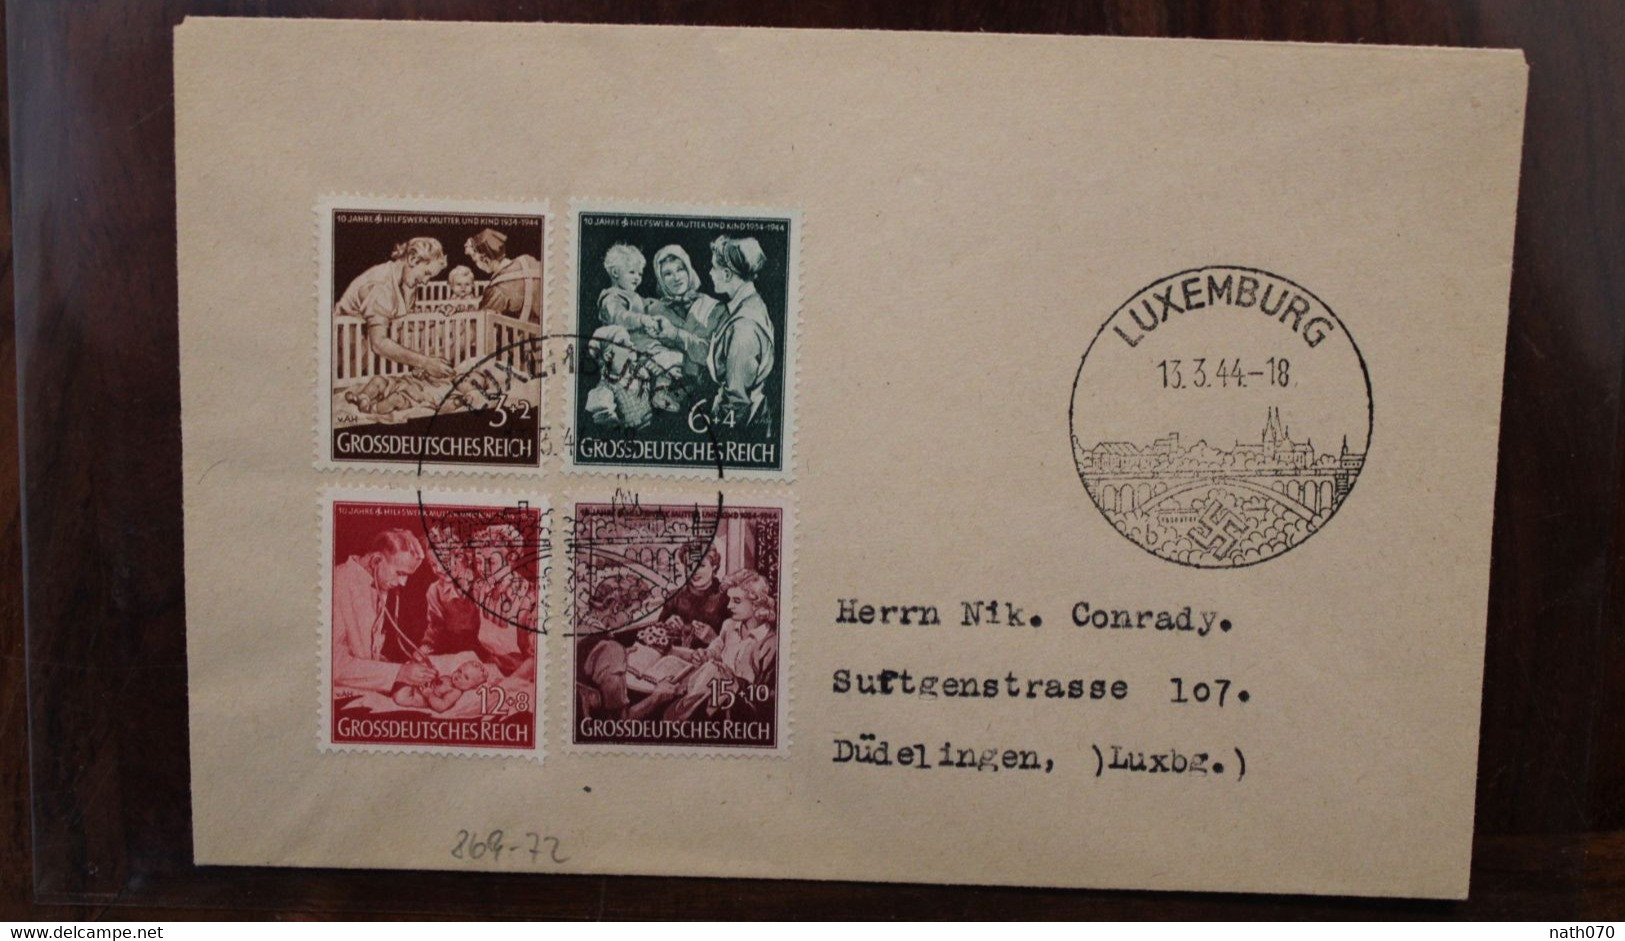 LUXEMBURG 1944 Dudelingen Cover Luxembourg Besetzung Occupation - 1940-1944 Occupation Allemande